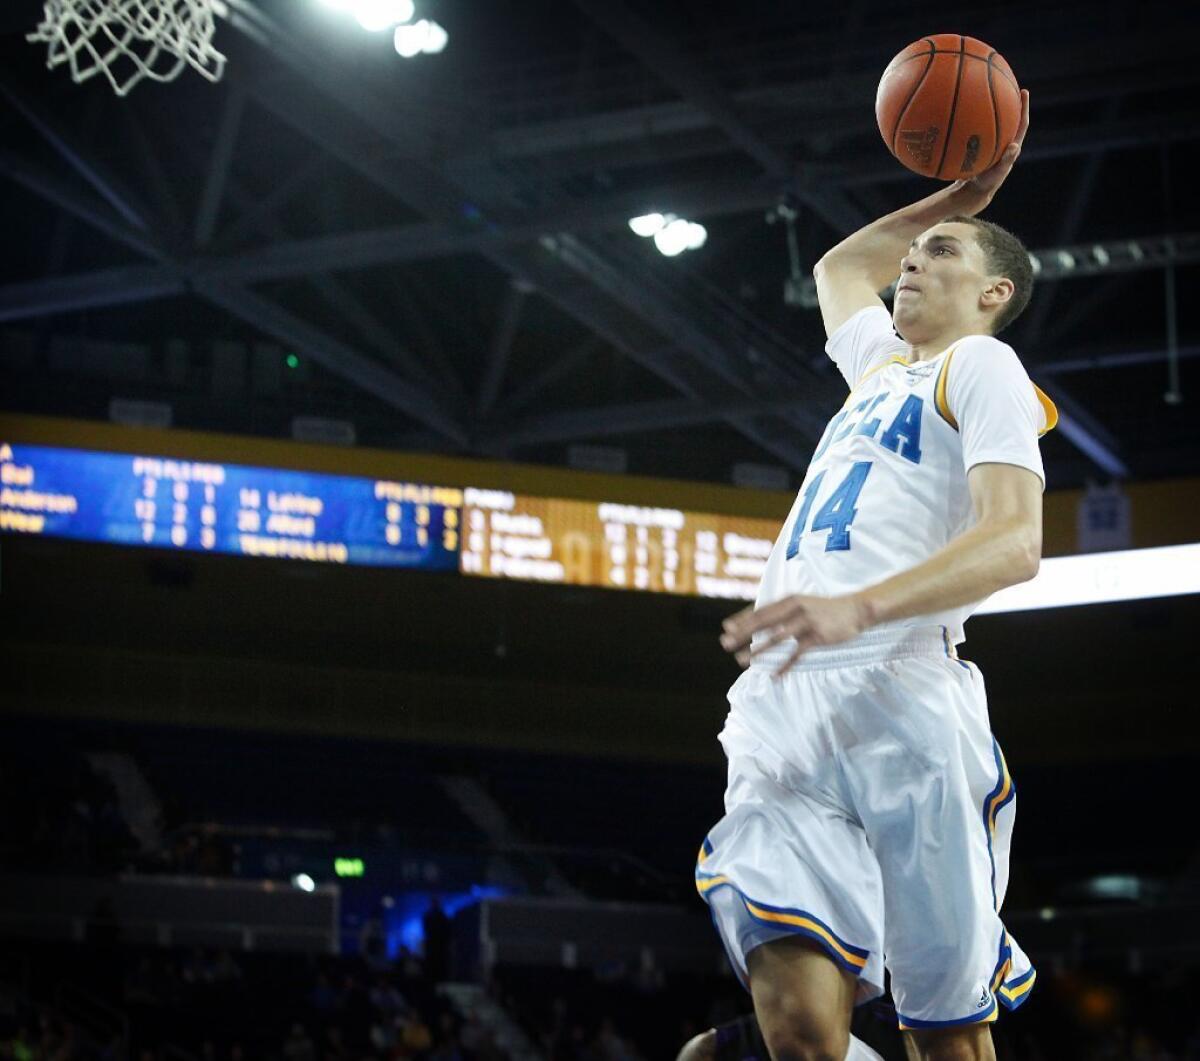 Report: Zach LaVine to leave UCLA for the NBA - Los Angeles Times